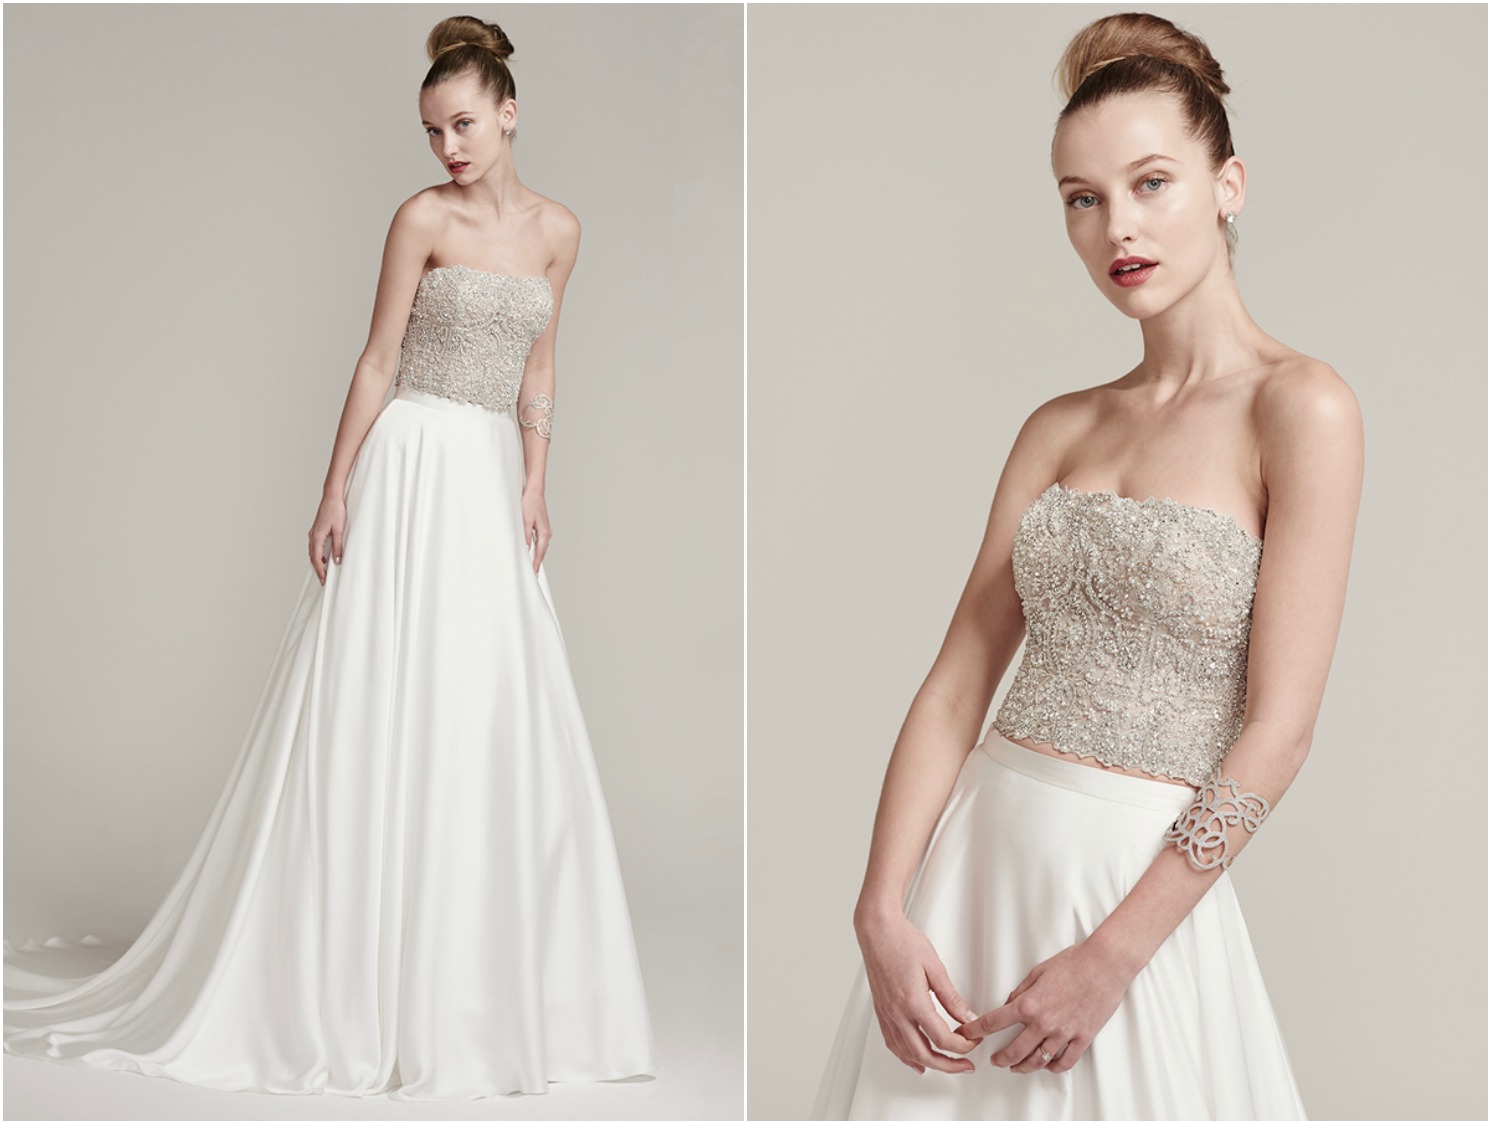 Bead encrusted strapless bodice sparkles with Swarovski crystals. Finished with crystal buttons over zipper closure. Inessa satin A-line skirt with delicate waistband and zipper closure.

<a href="https://www.maggiesottero.com/sottero-and-midgley/rosella-aviana-marie/9962" target="_blank">Sottero &amp; Midgley</a>